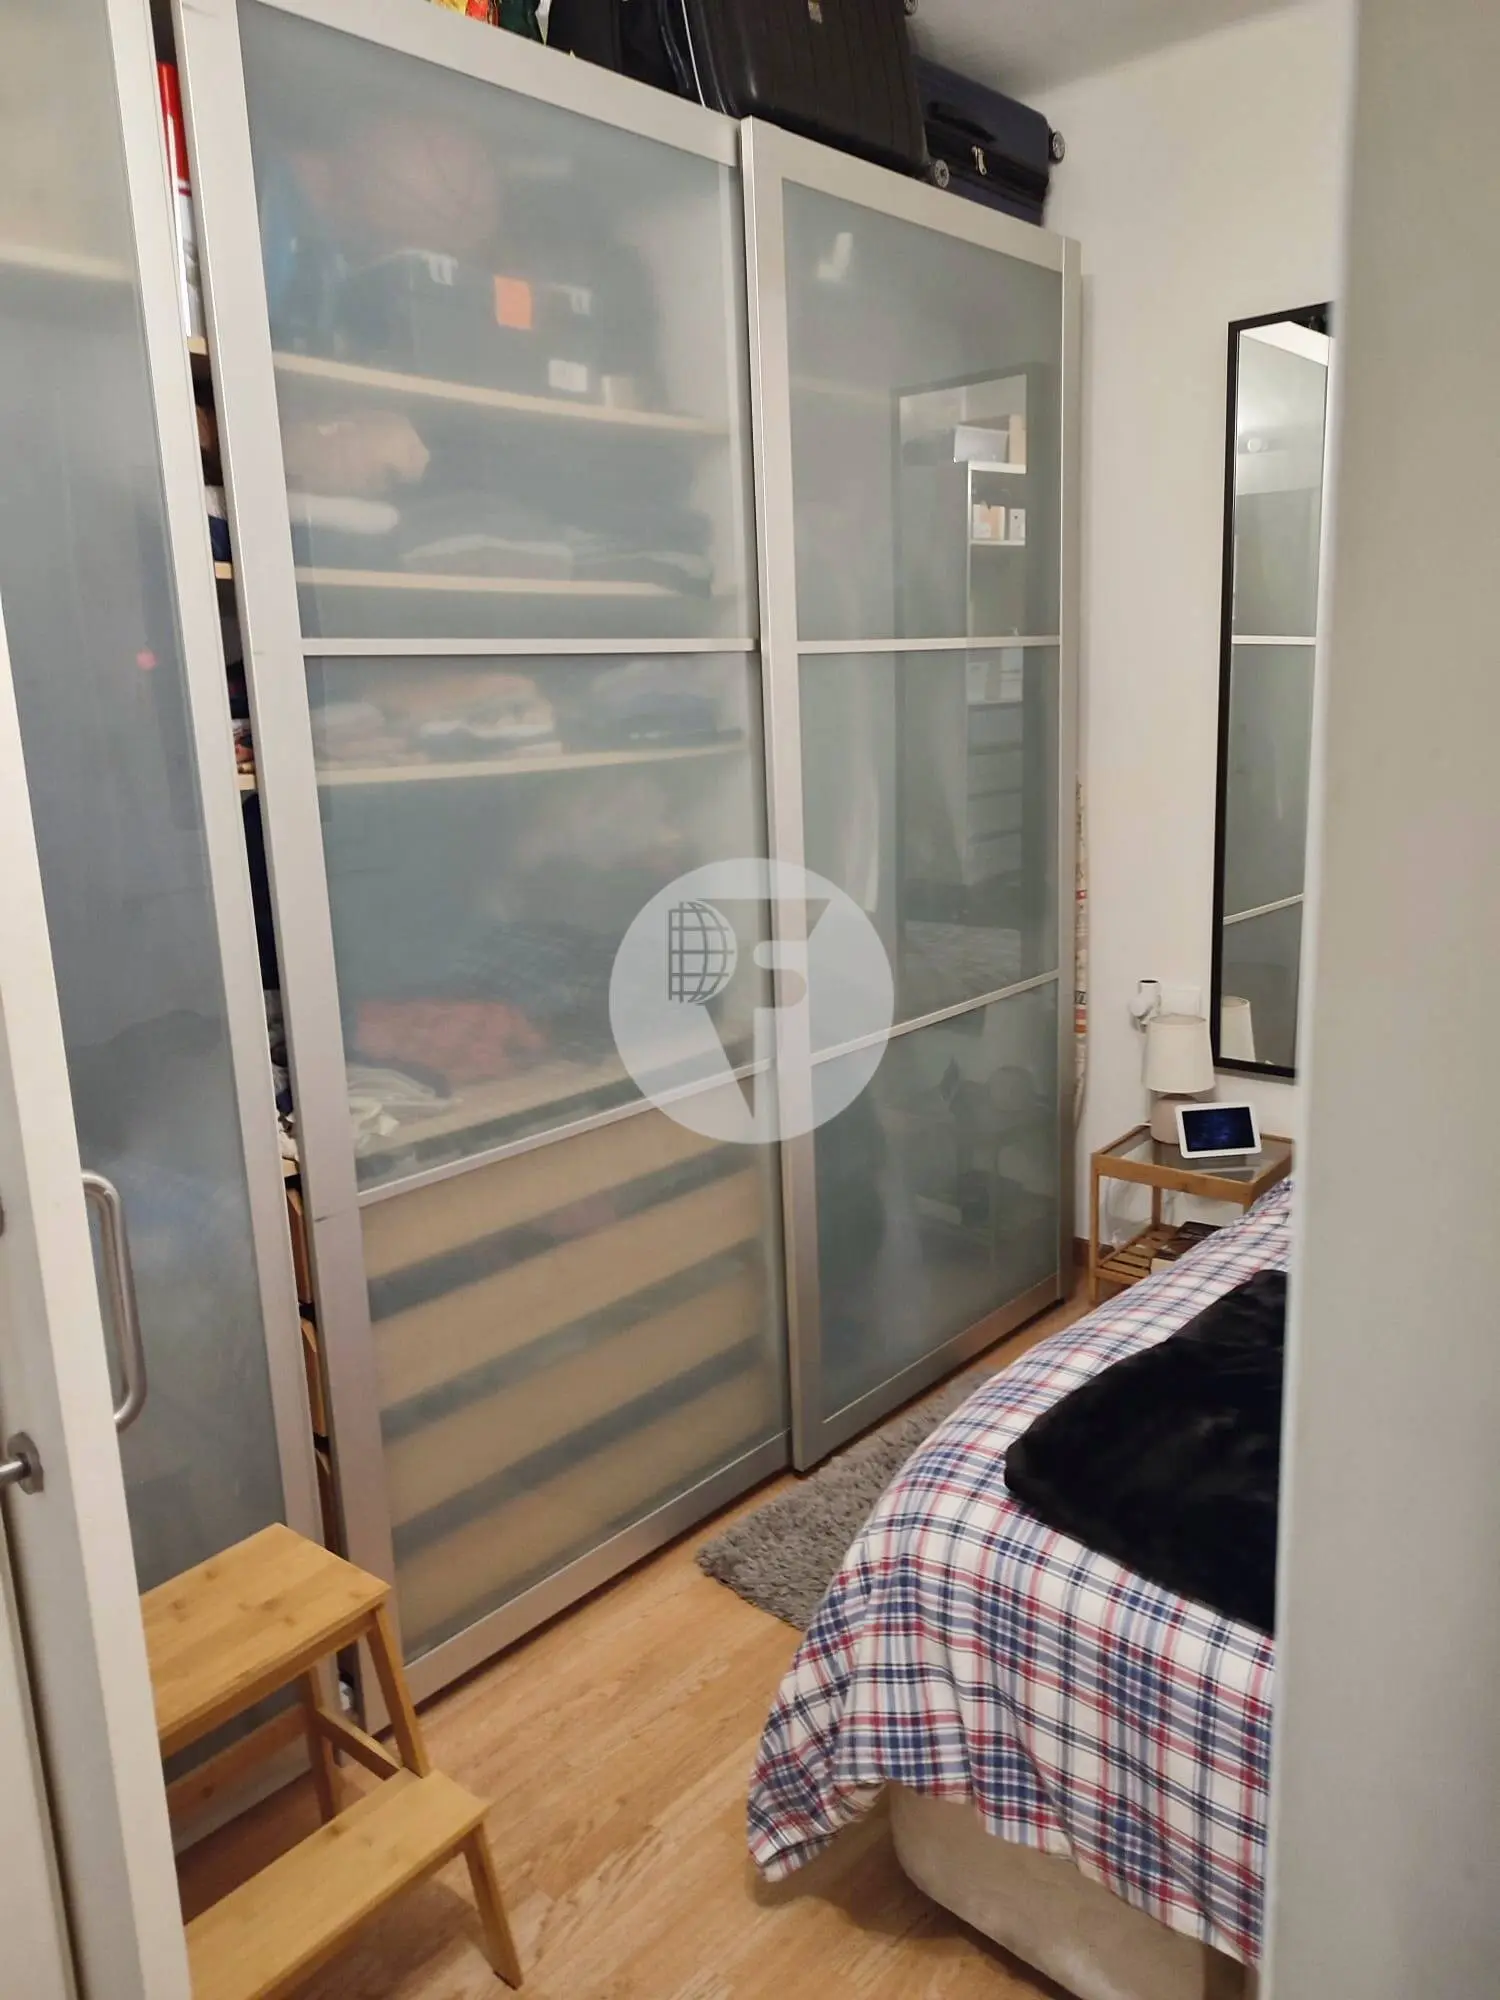 Magnificent apartment located in the Poble Sec neighborhood. 15